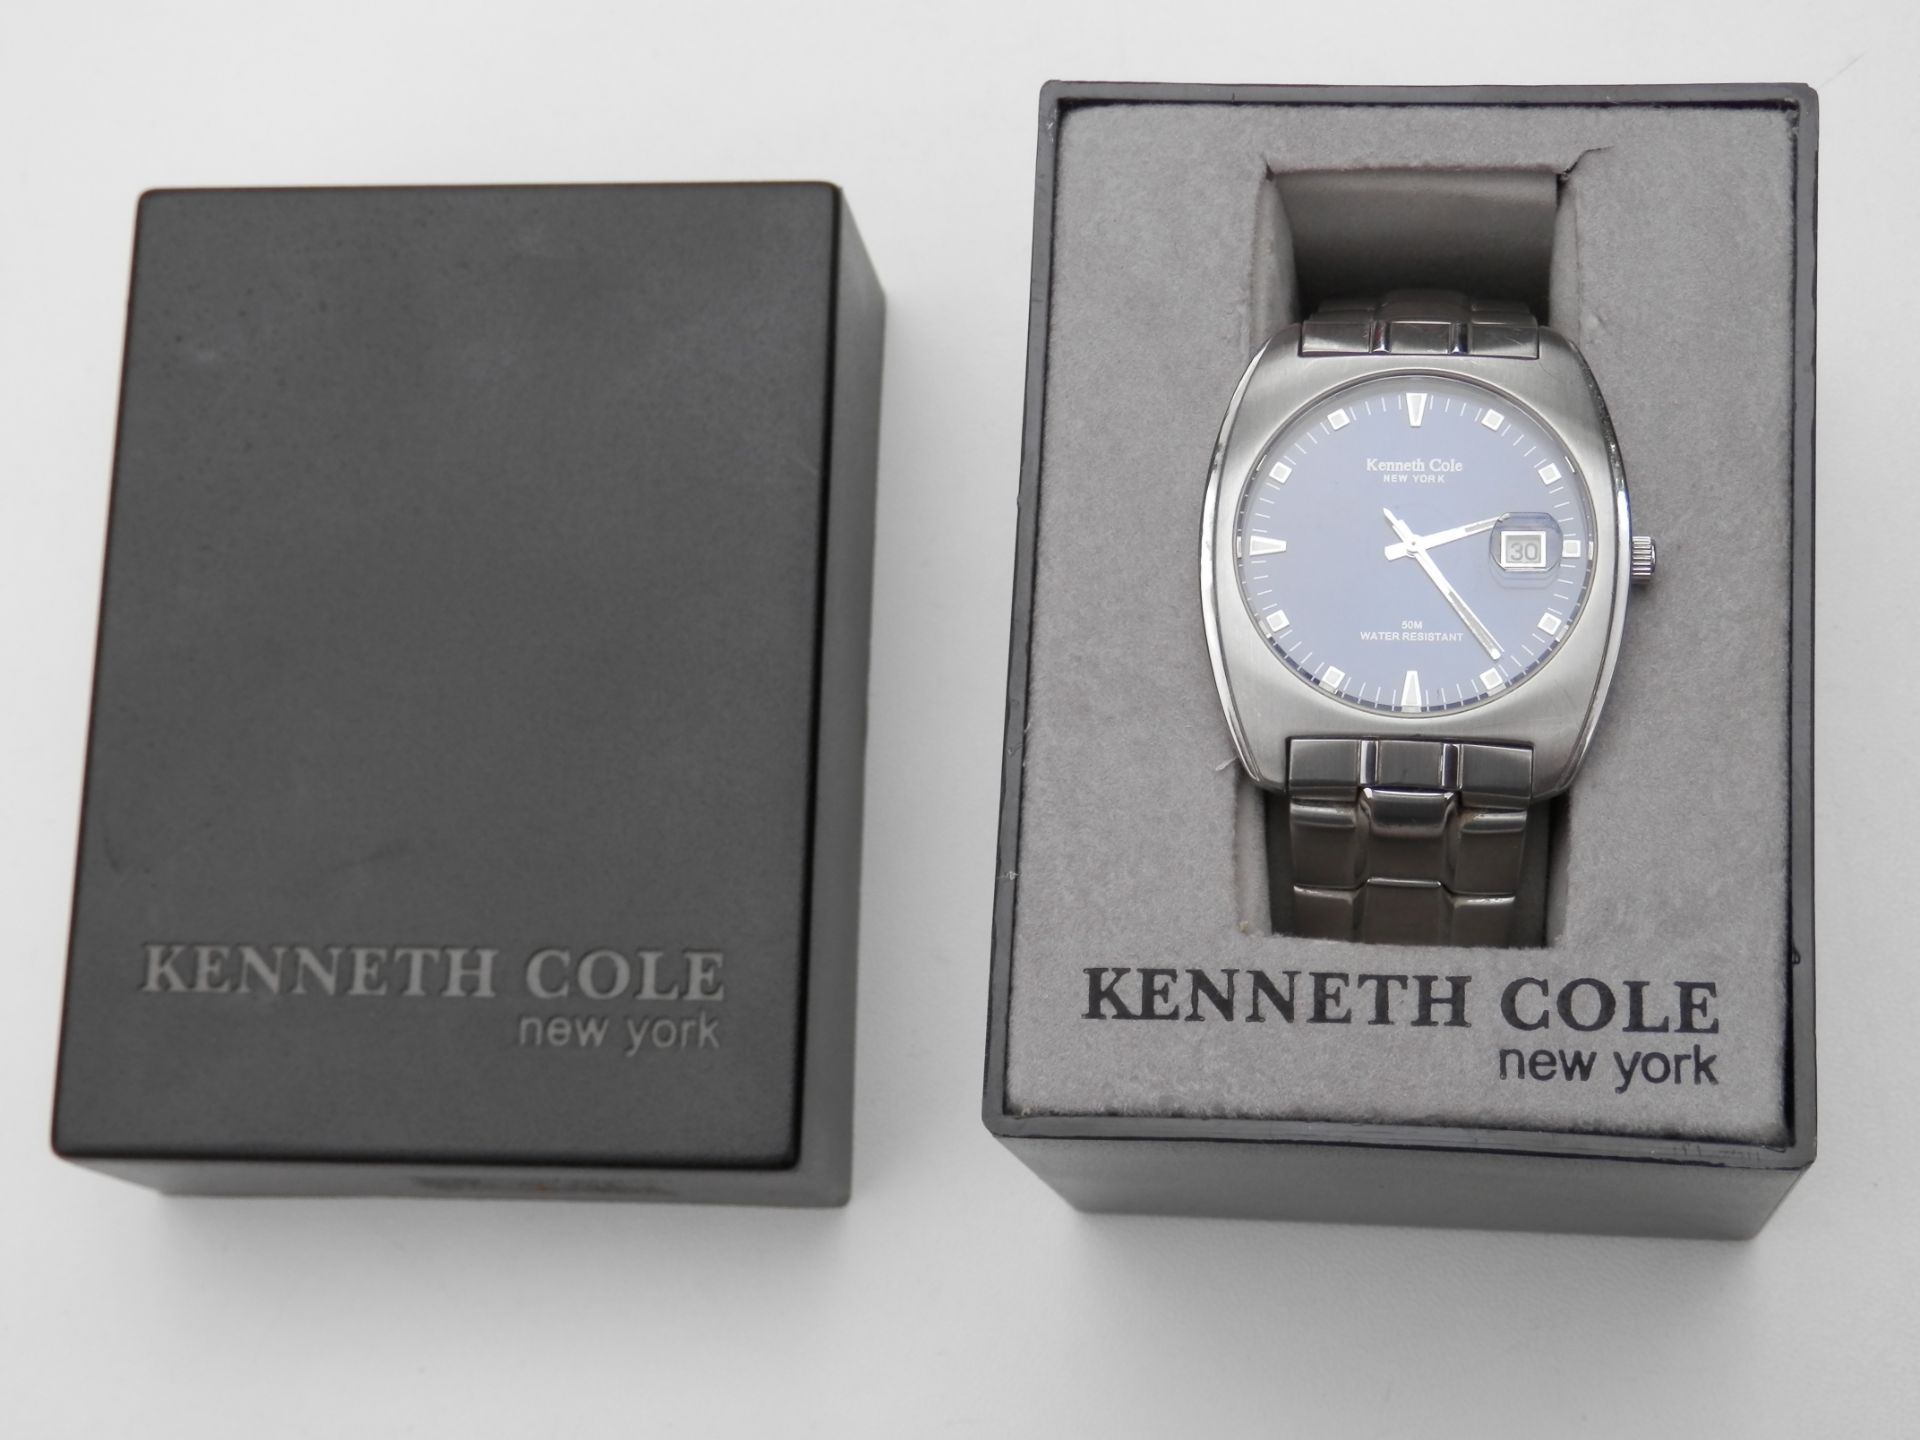 GENTS BOXED KENNETH COLE NEW YORK, FULL STAINLESS 50M WR QUARTZ DATE WATCH, FULLY WORKING. RRP $125 - Image 3 of 8